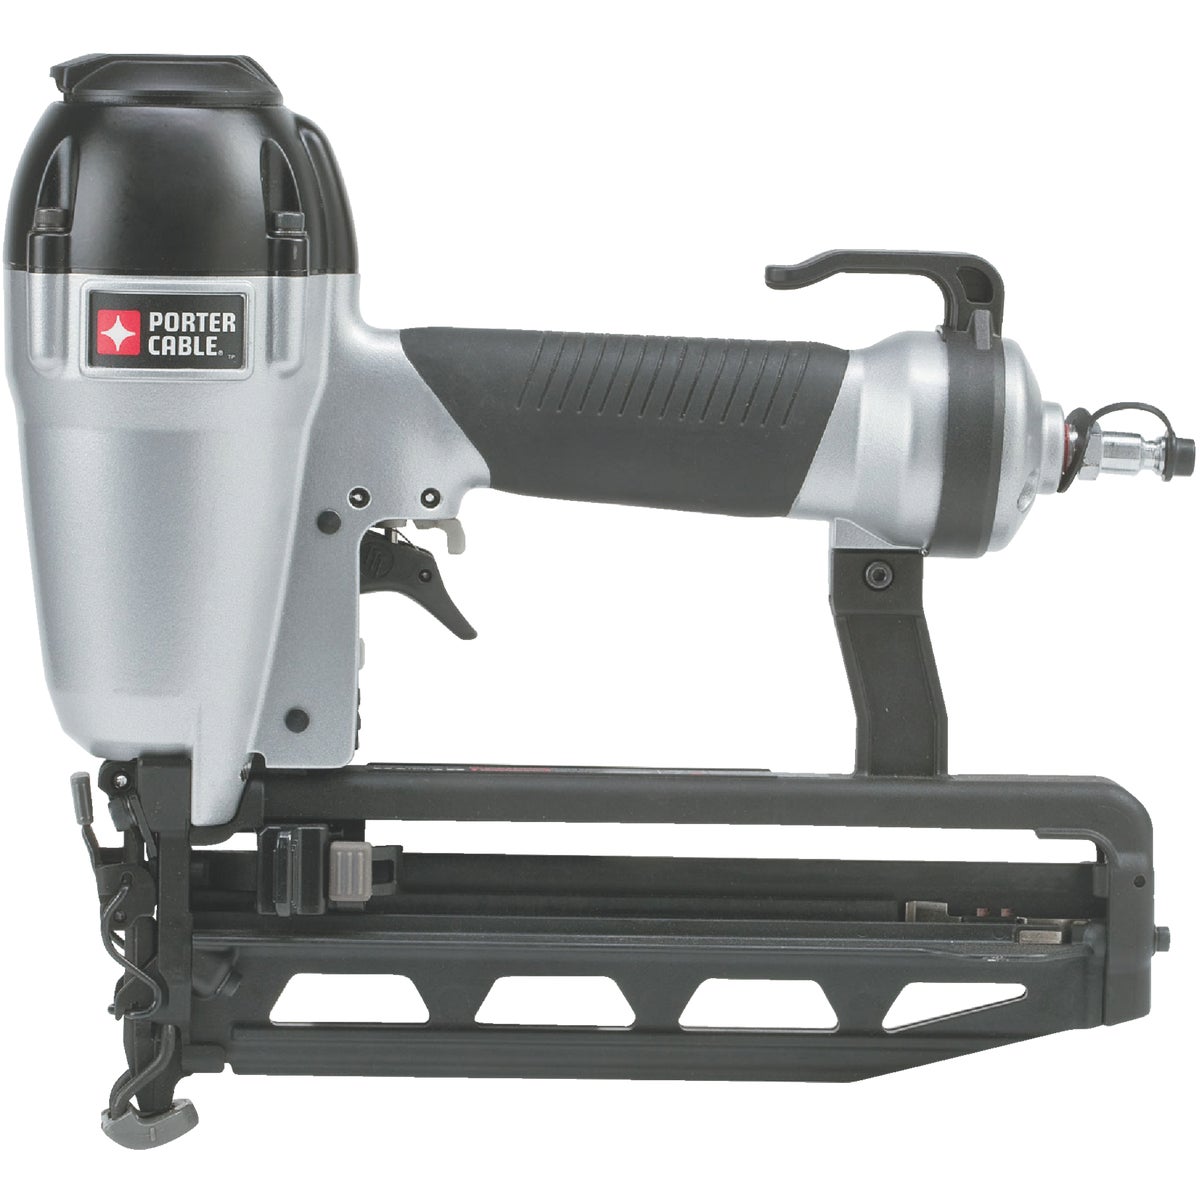 Porter Cable 16-Gauge 2-1/2 In. Straight Finish Nailer Kit